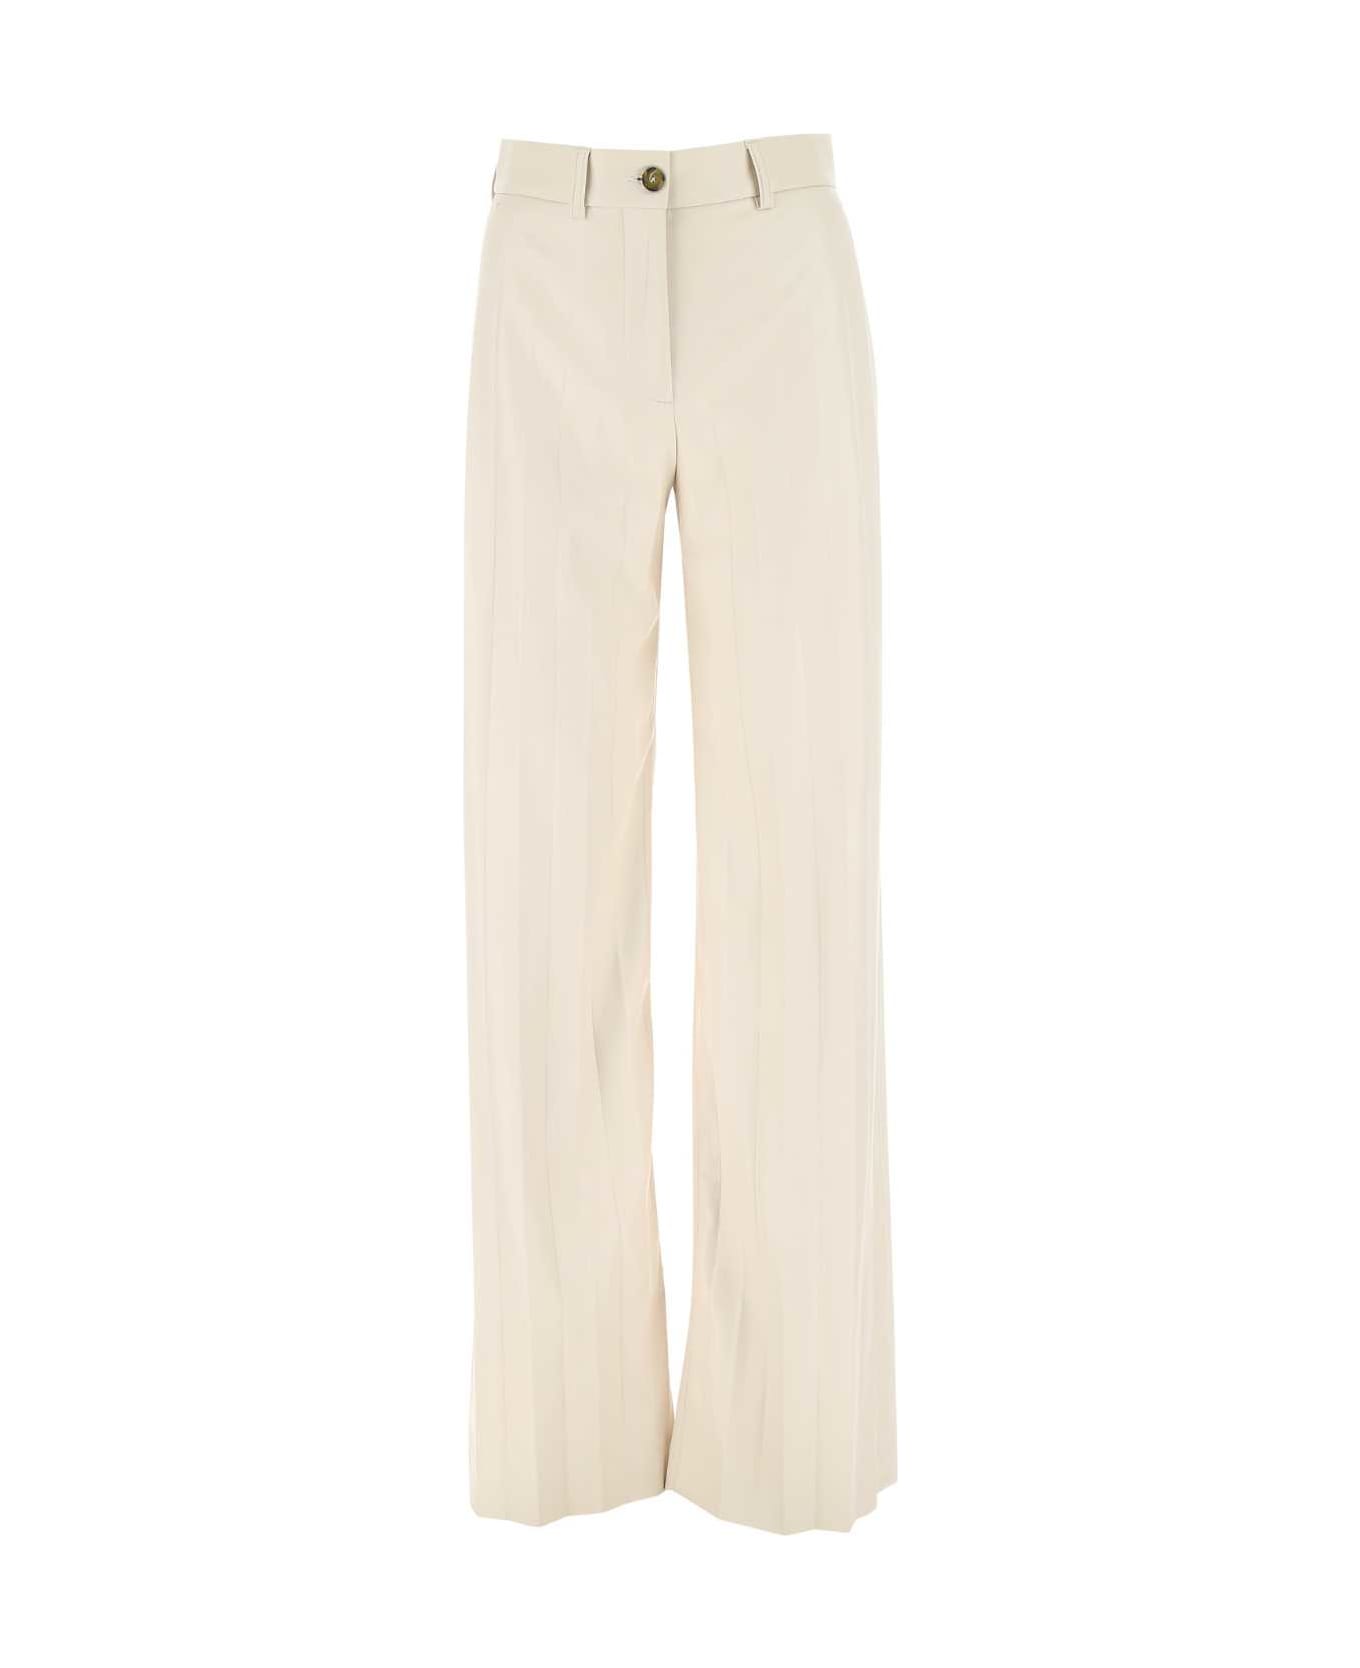 MSGM Ivory Synthetic Leather Pant - 02 ボトムス